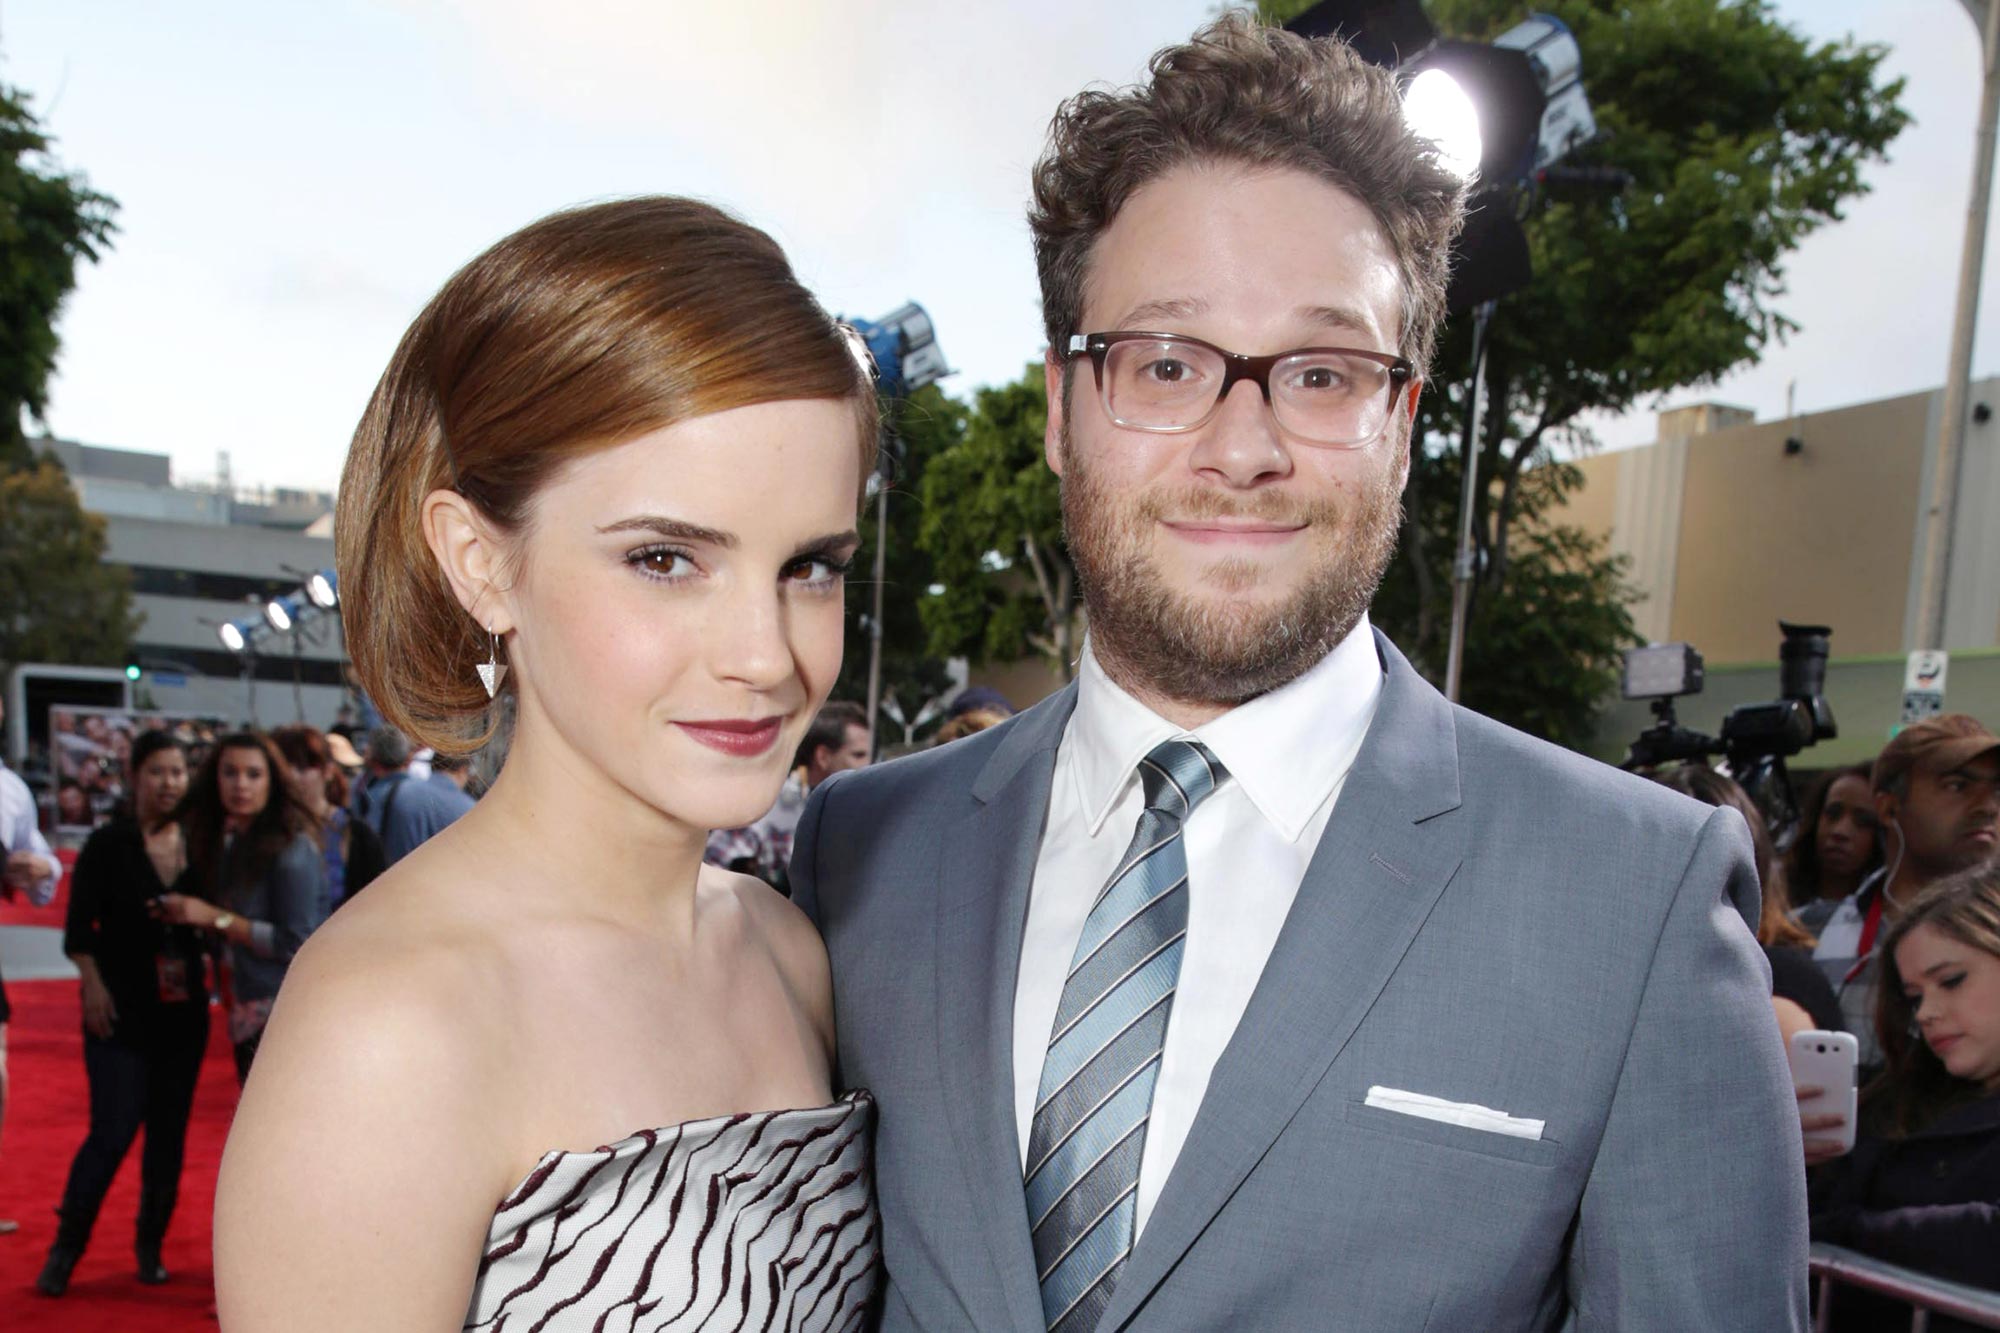 Seth Rogen says there are 'no hard feelings' after Emma Watson walked off This Is the End set